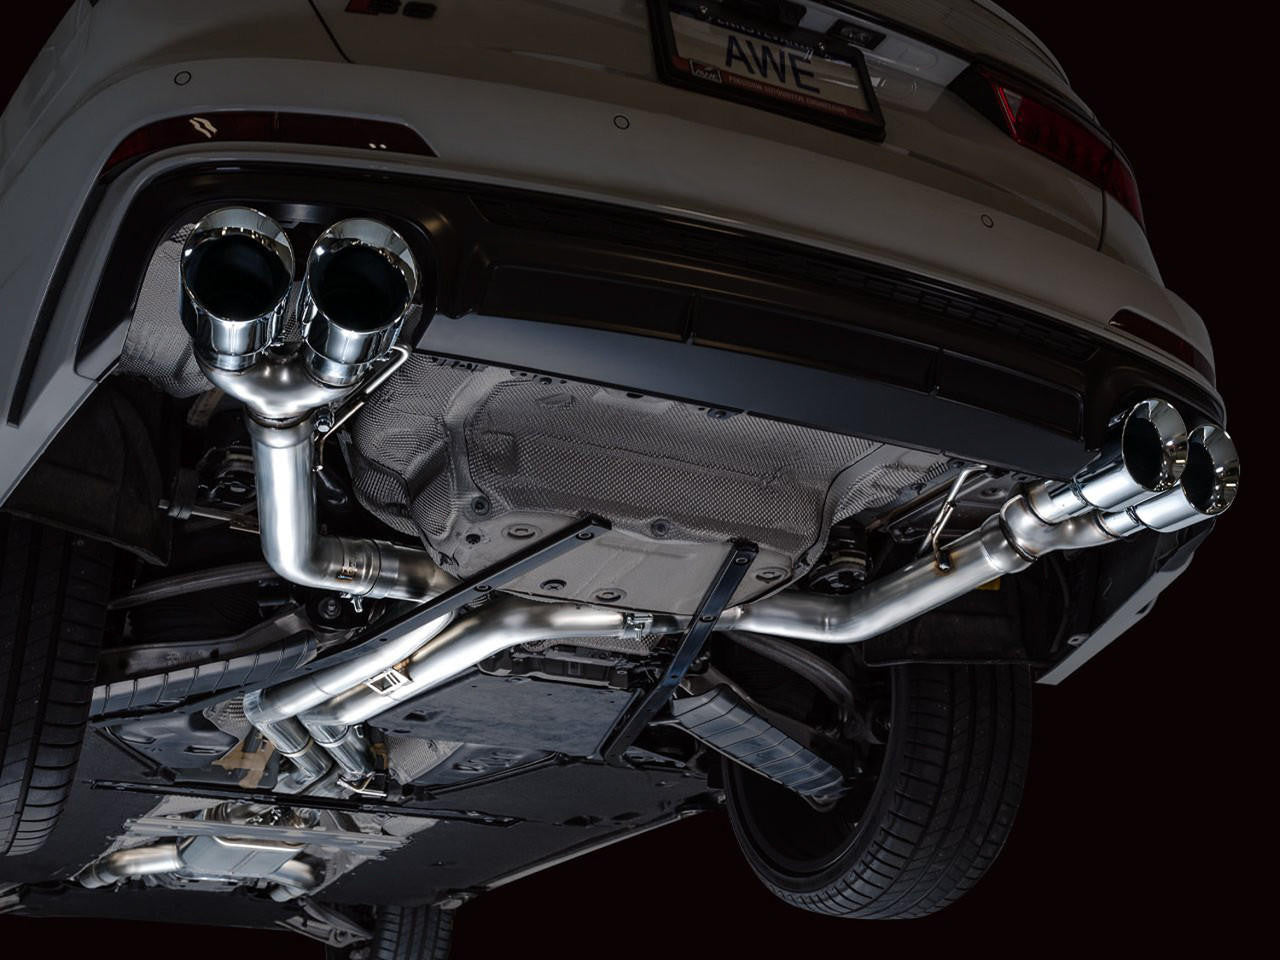 AWE Tuning AWE Track Edition Exhaust for Audi C8 S6/S7 - Chrome Silver Tips 3020-42101 